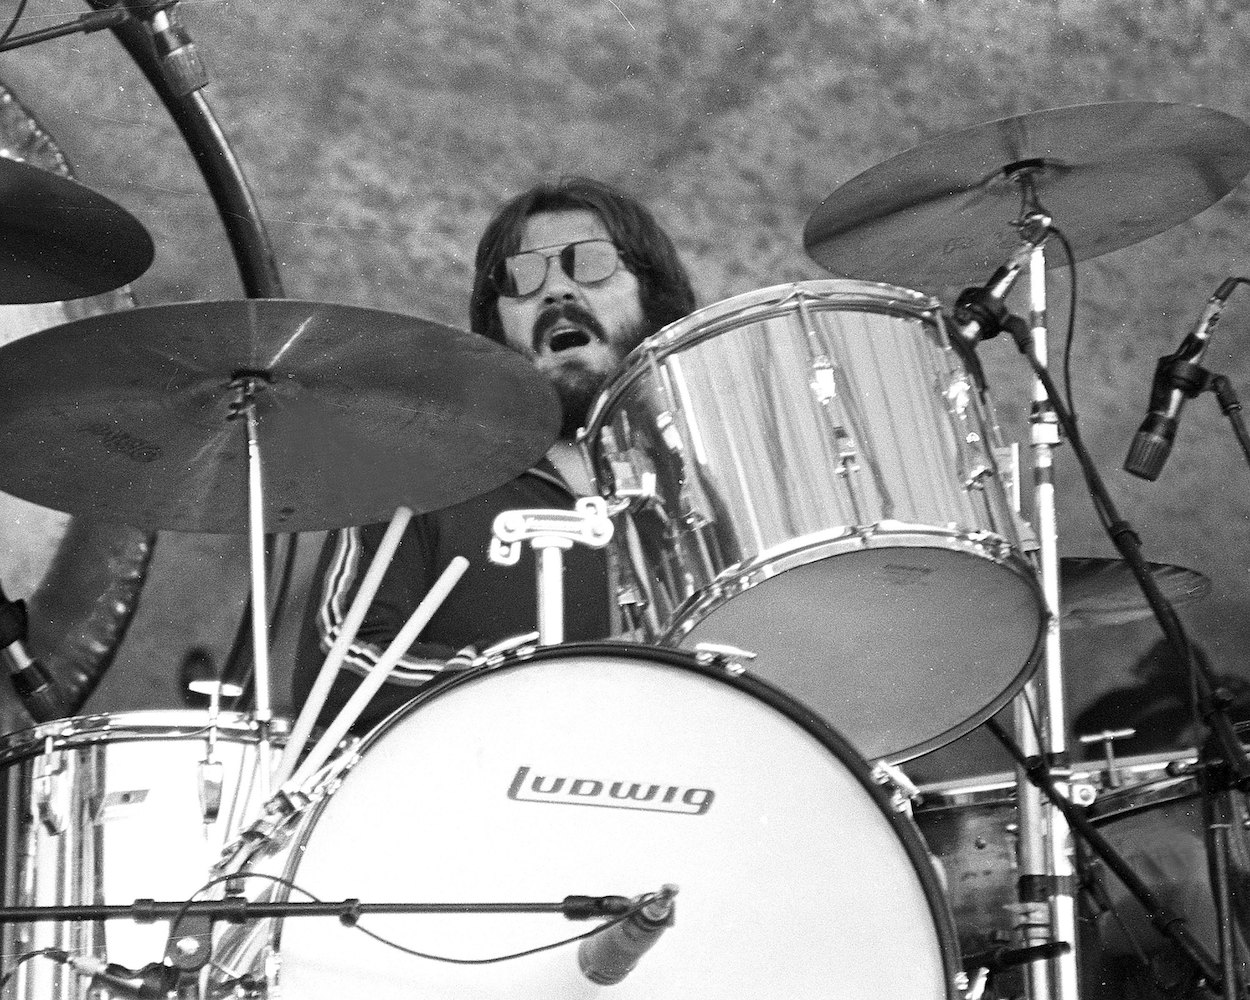 John Bonham performs with Led Zeppelin circa 1970. Some of the drummers first gigs involved Bonham and another drummer tricking the audience.